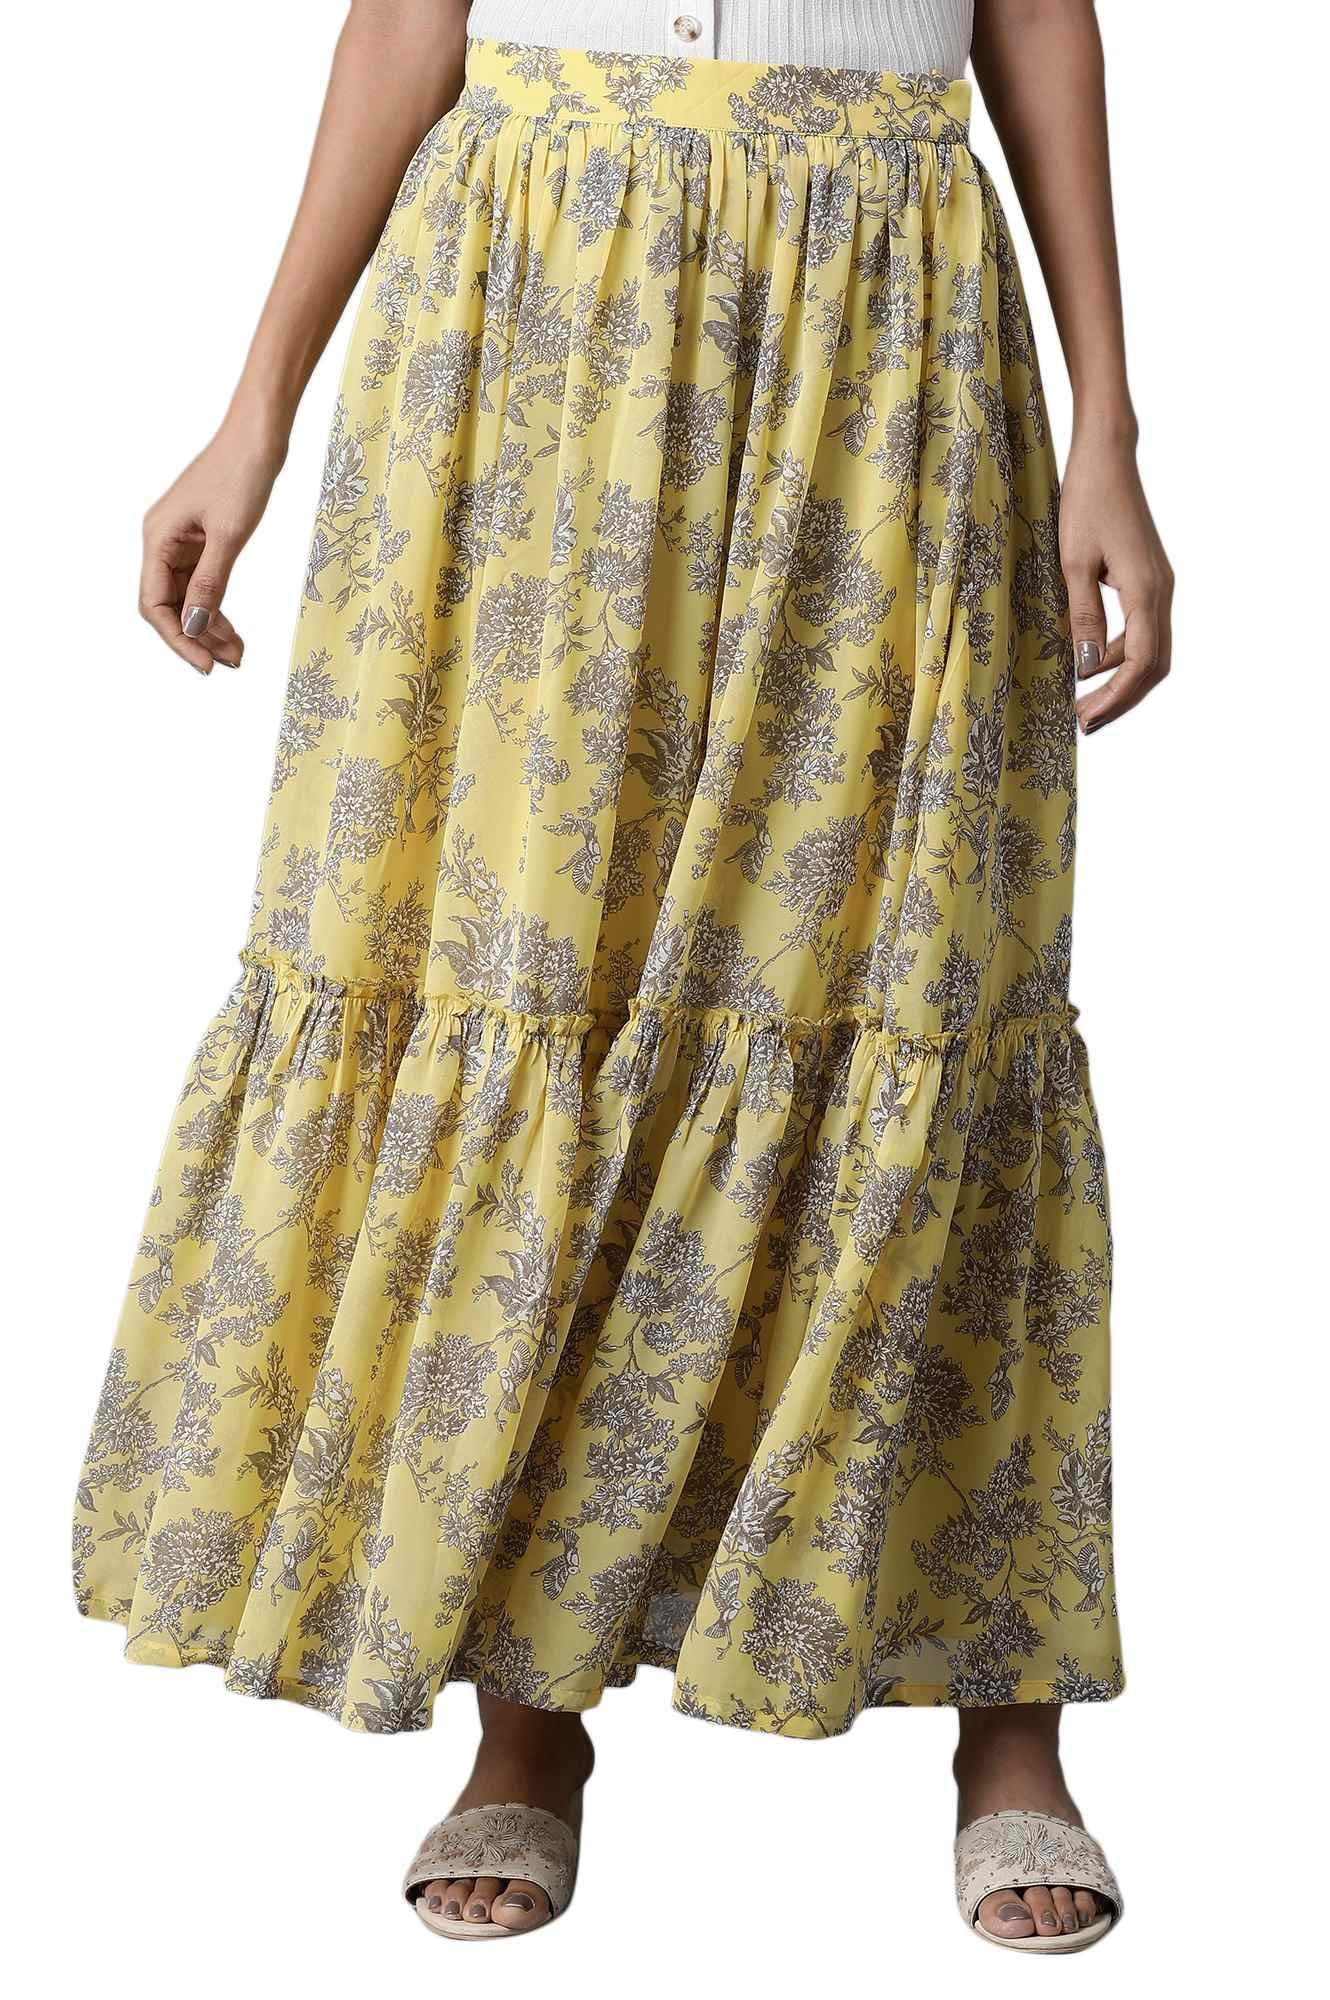 W for Woman Yellow Georgette Tiered Skirt_21FEW50302-114057_L